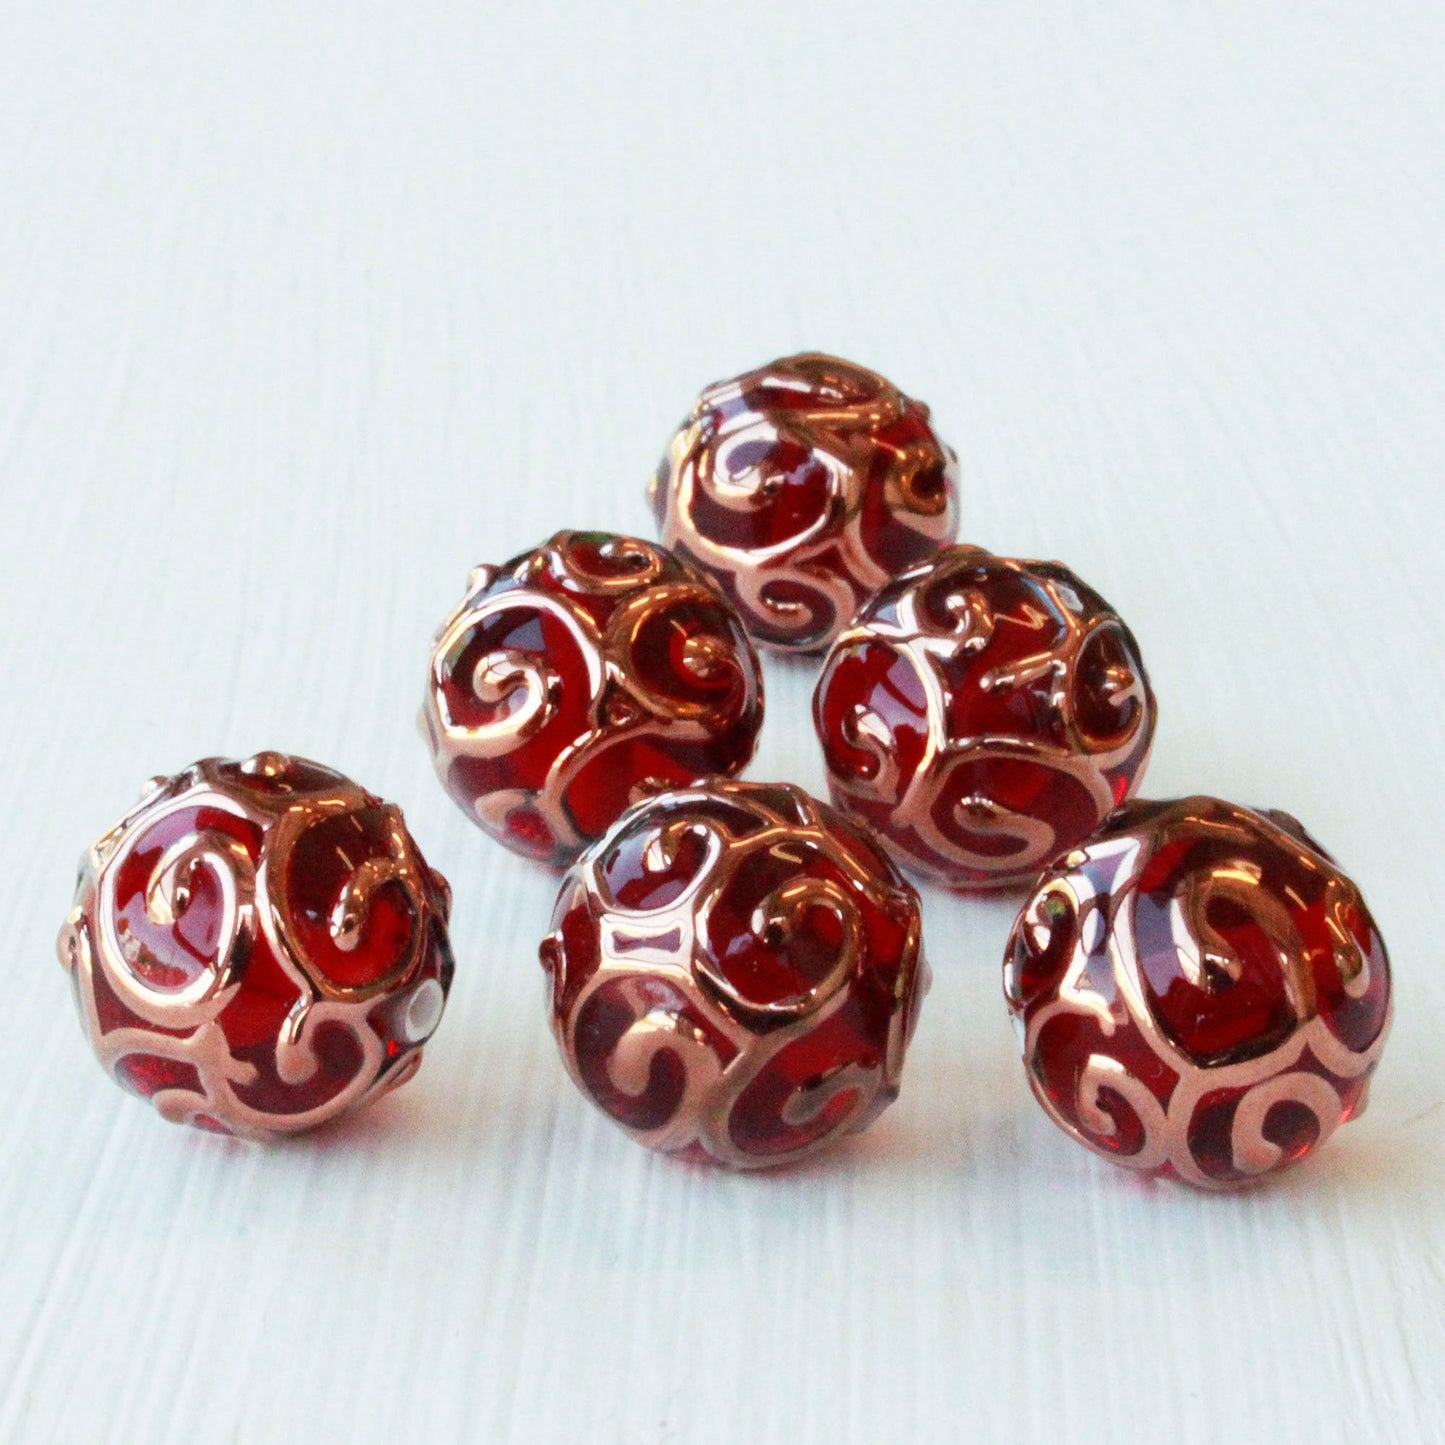 14mm Round Lampwork Beads - Red - 2,4 or 8